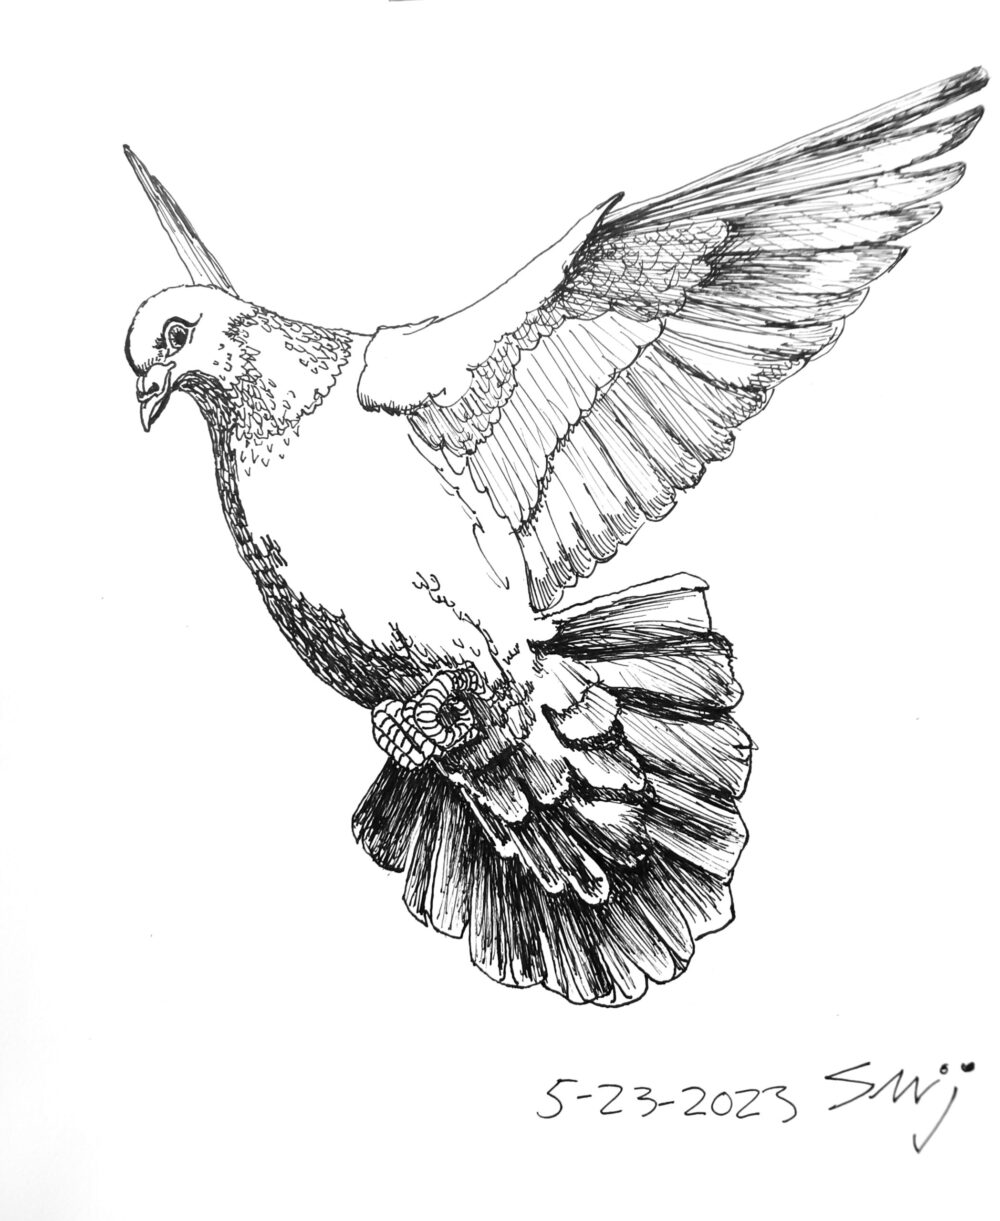 JamesPerry Pigeon Glory 200 Pen On Paper 8.5X13 2023 scaled scaled